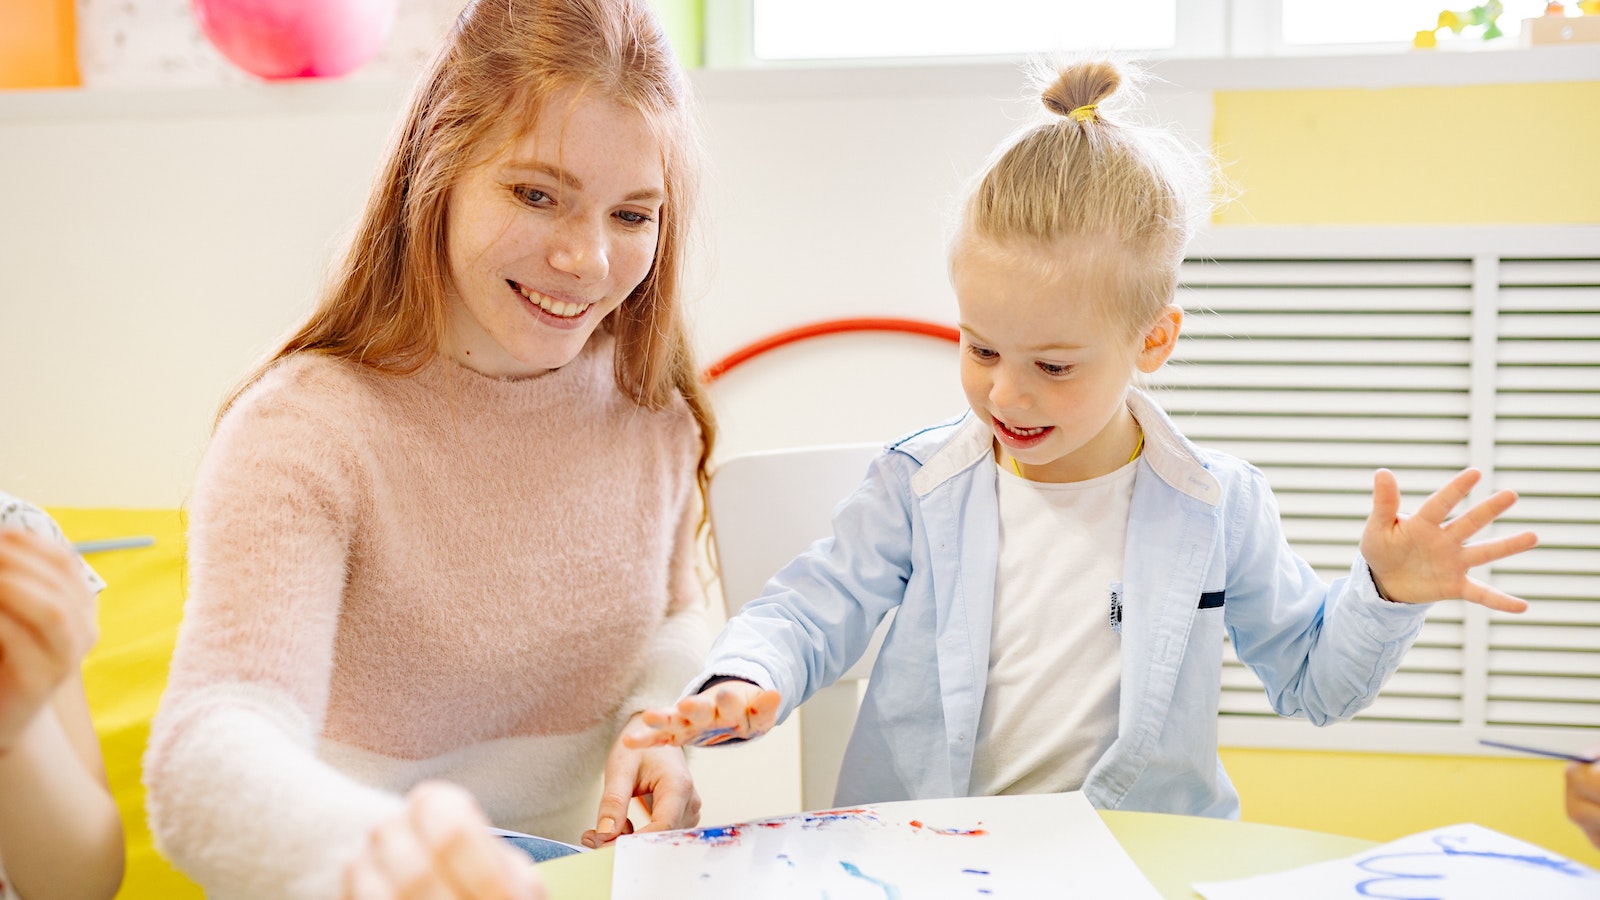 Girl learning to paint with a childcare worker